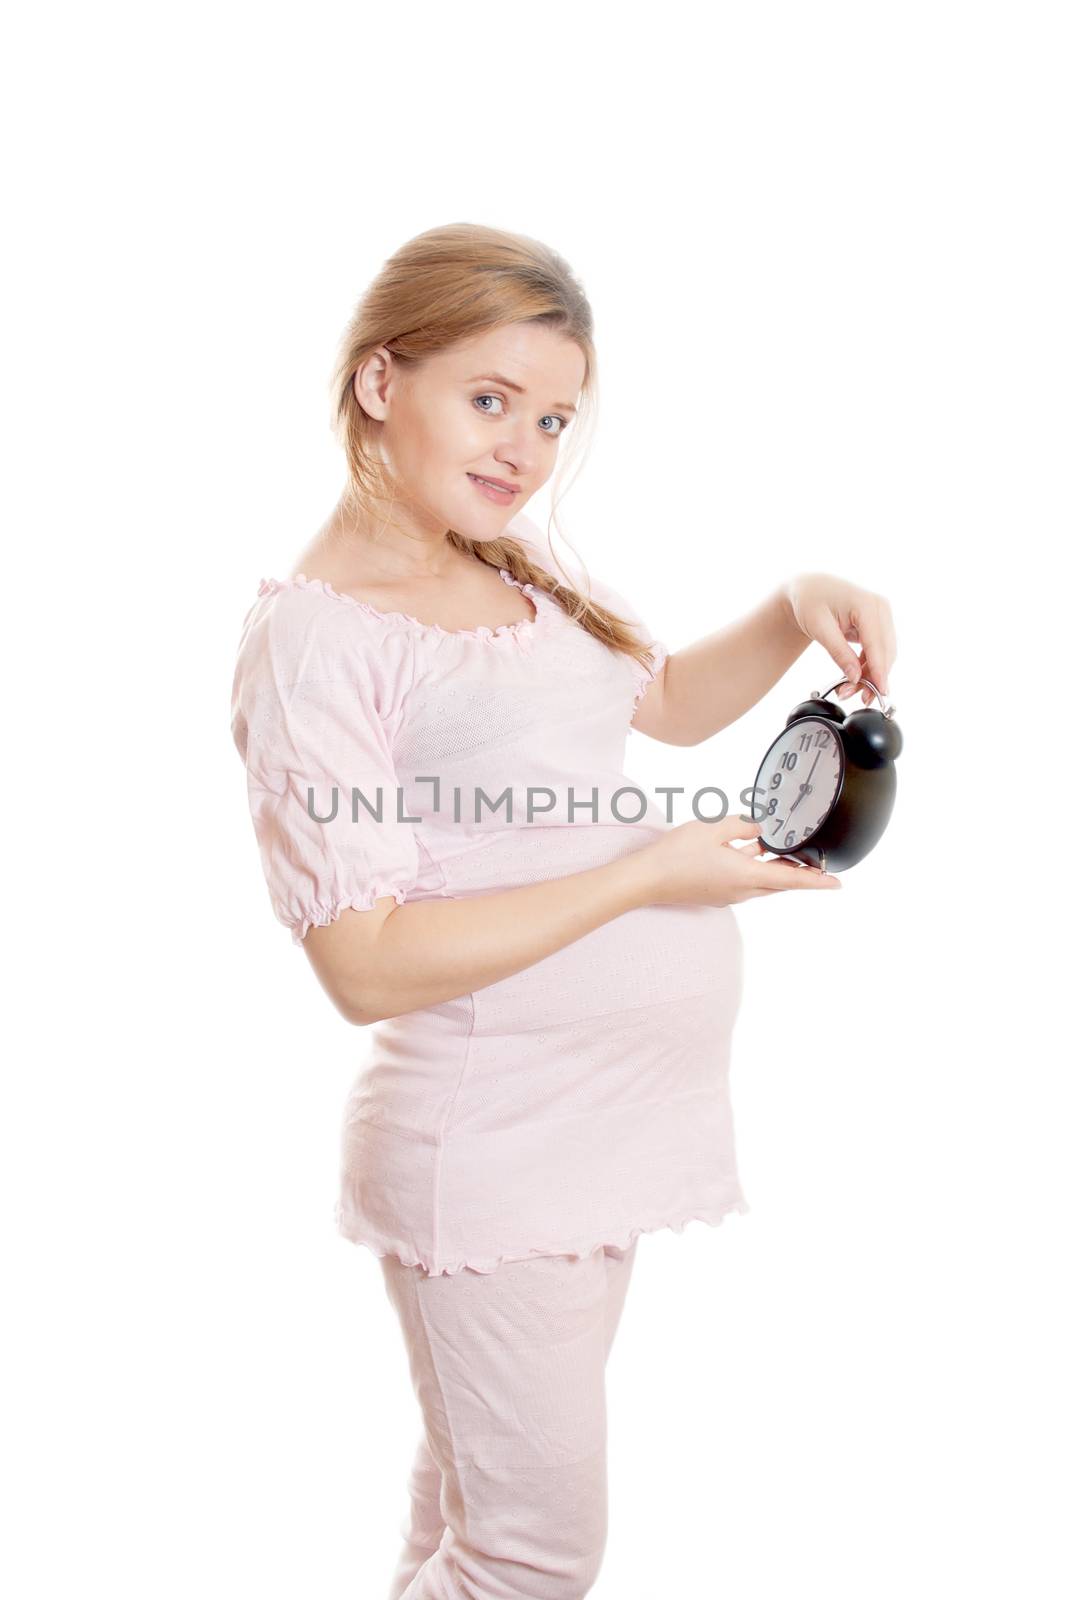 Pregnant woman looks at the clock on a white background